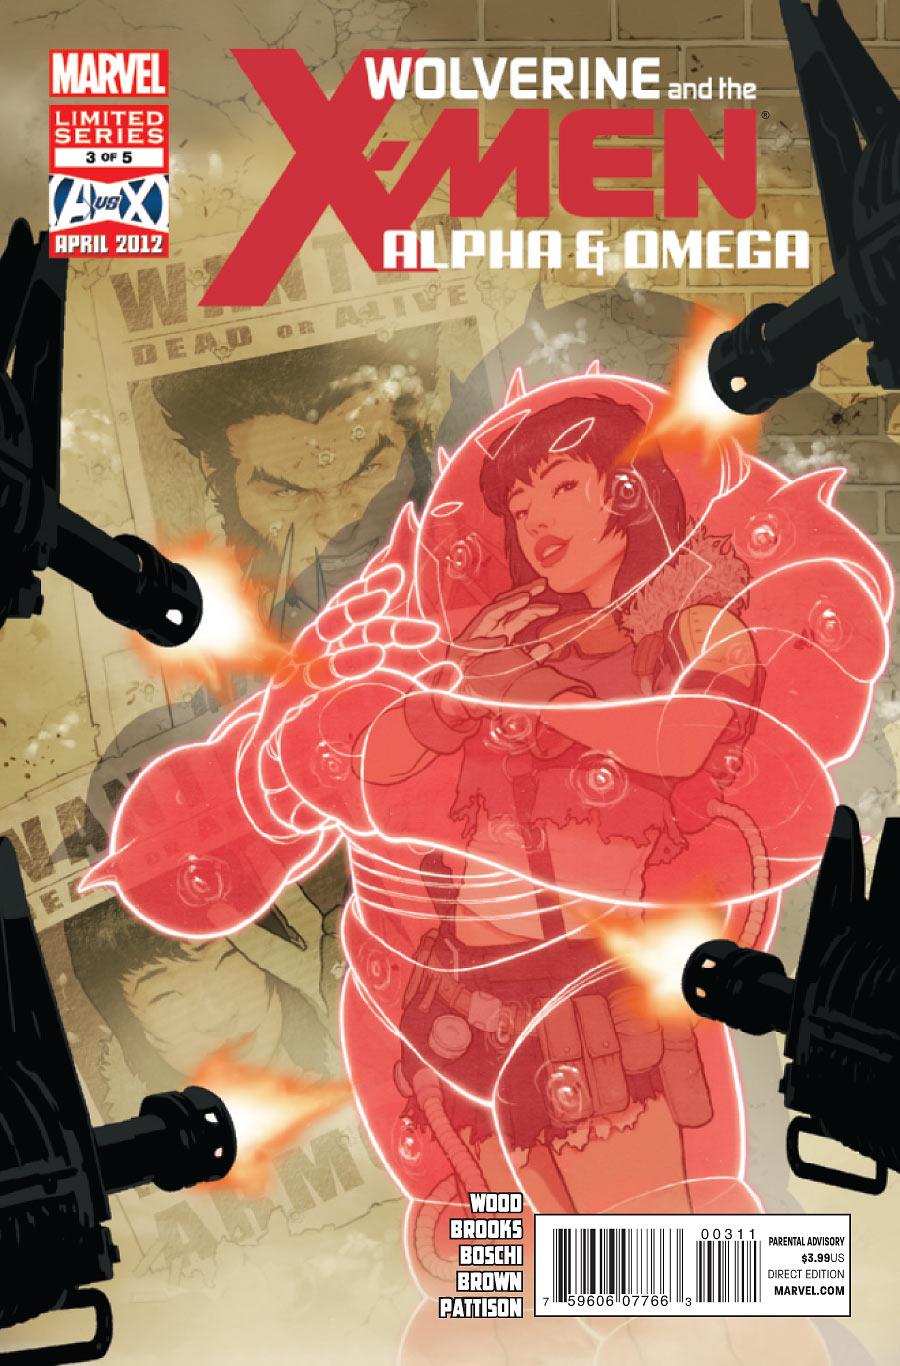 Wolverine and the X-Men: Alpha & Omega Vol. 1 #3